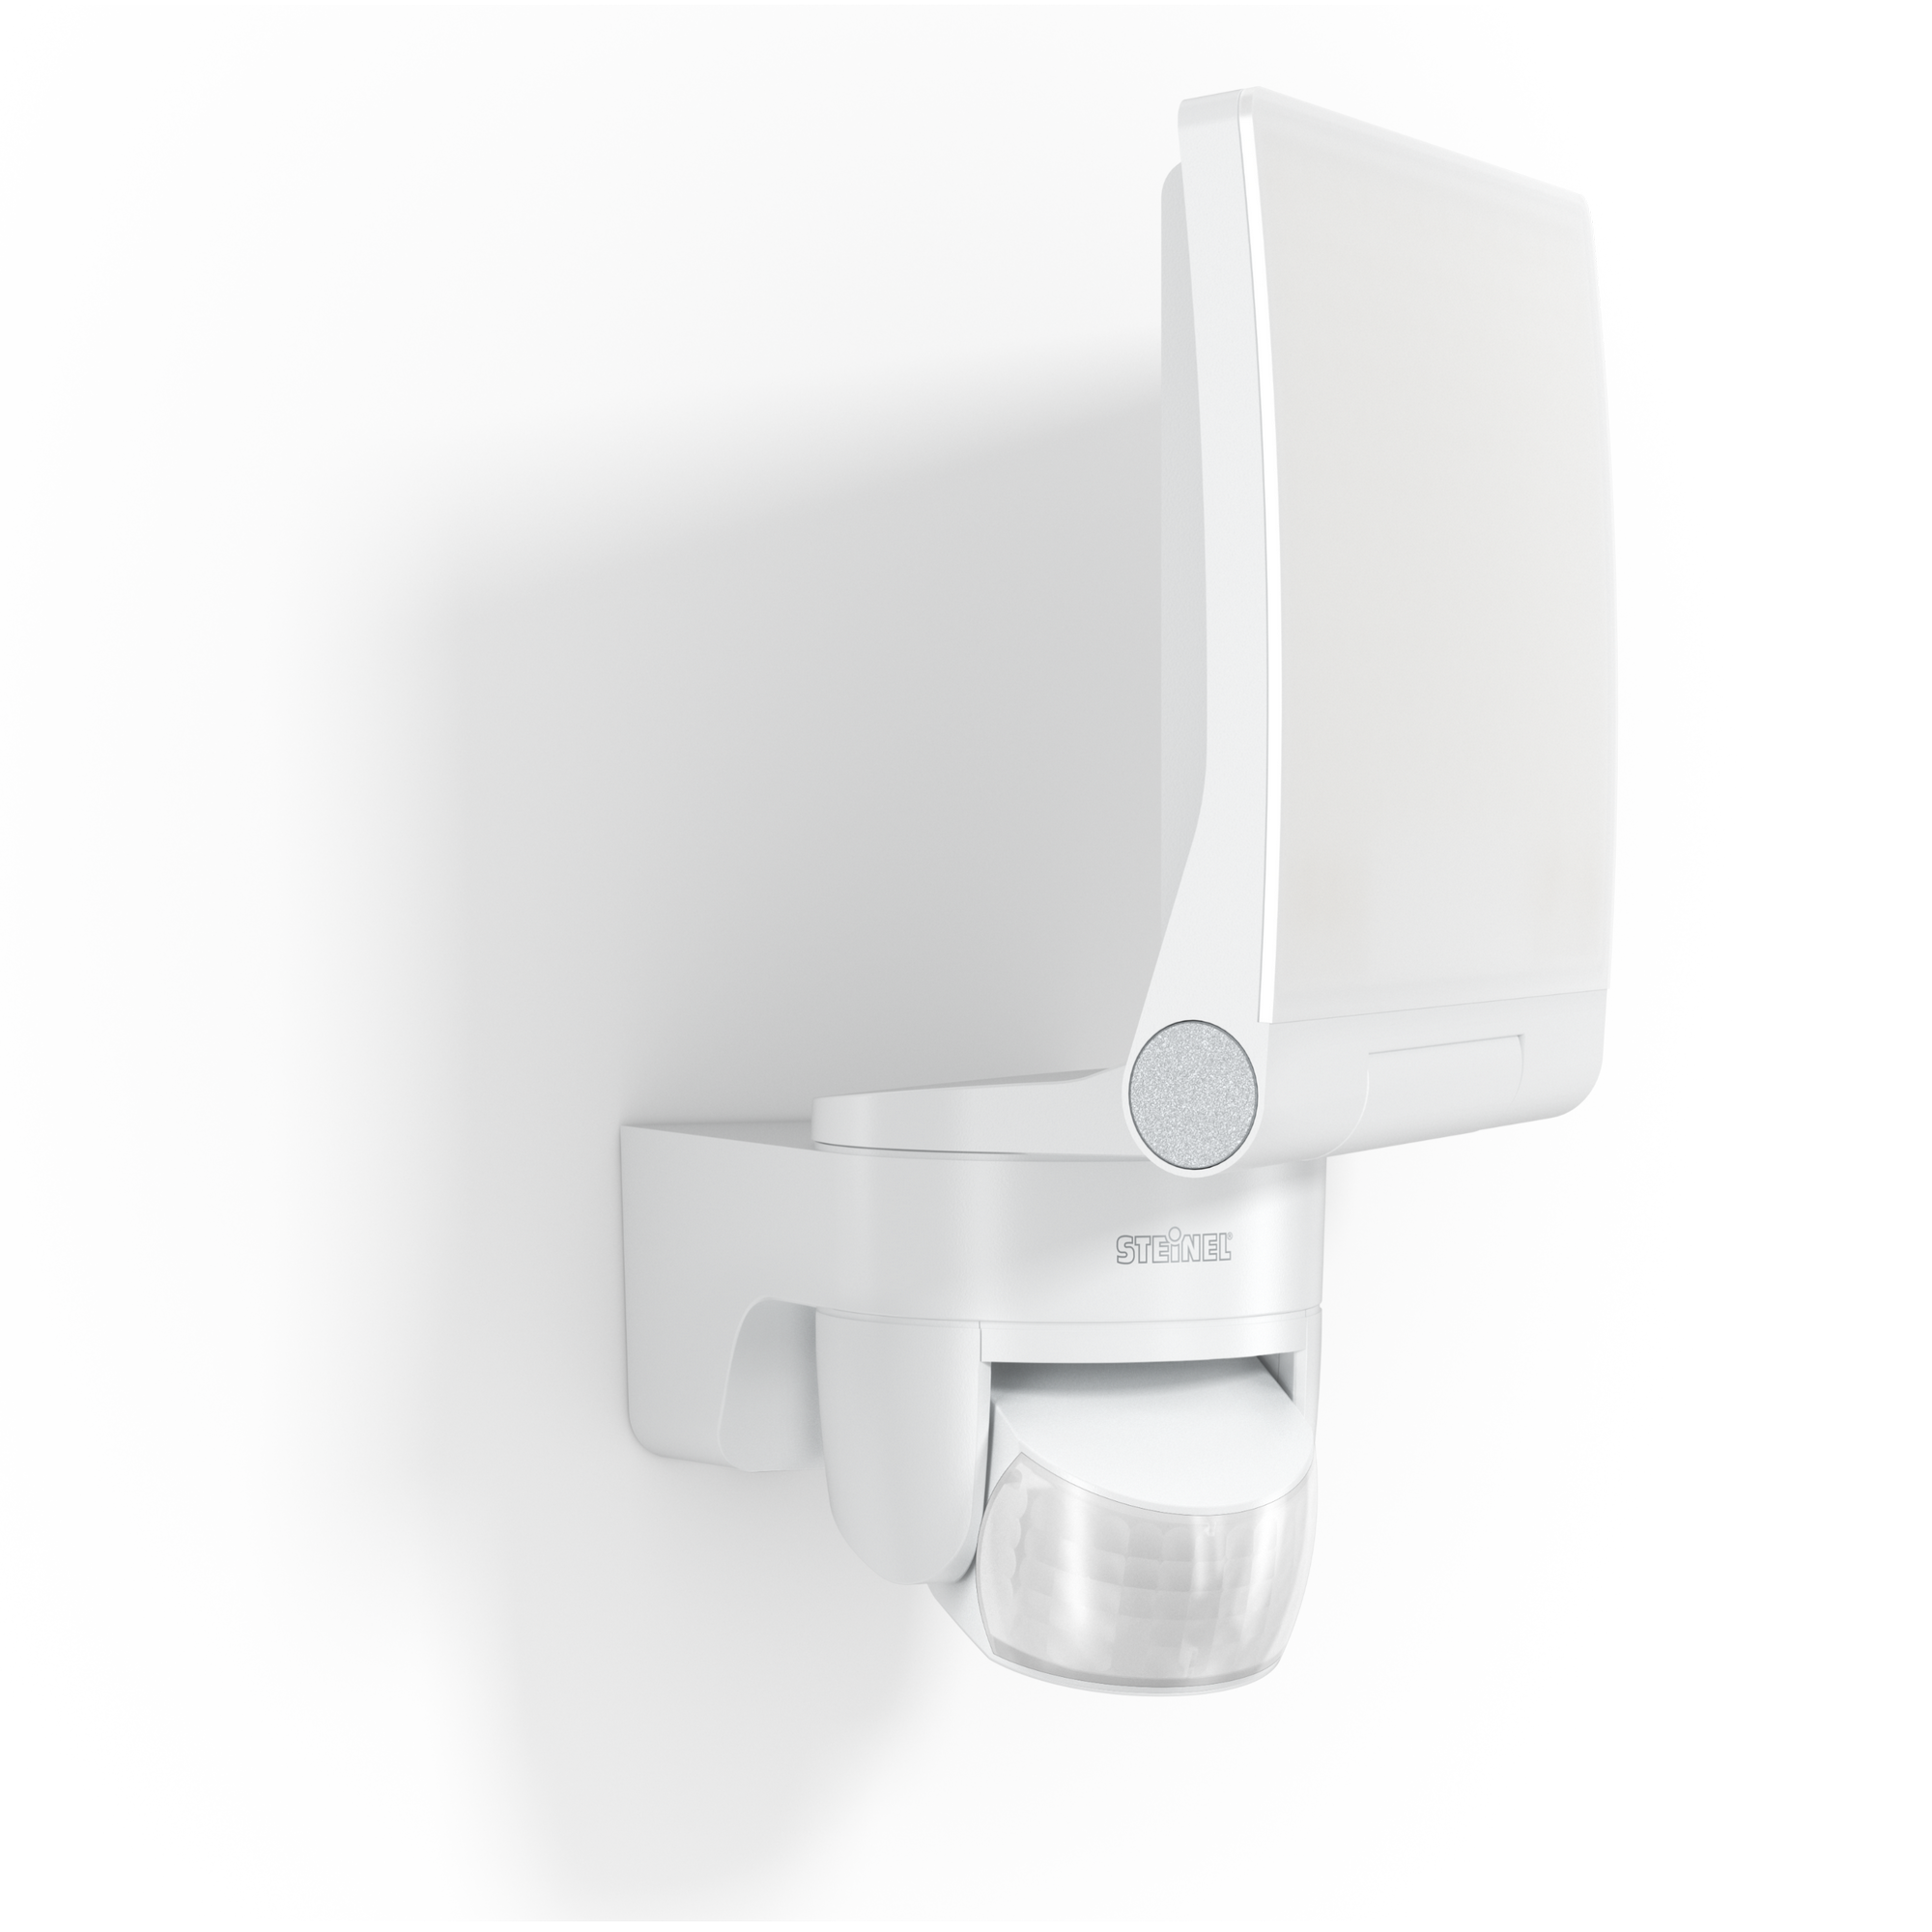 LED-Strahler 'XLED Home 2 S' mit Bewegungsmelder 13,7 W silbern + product picture